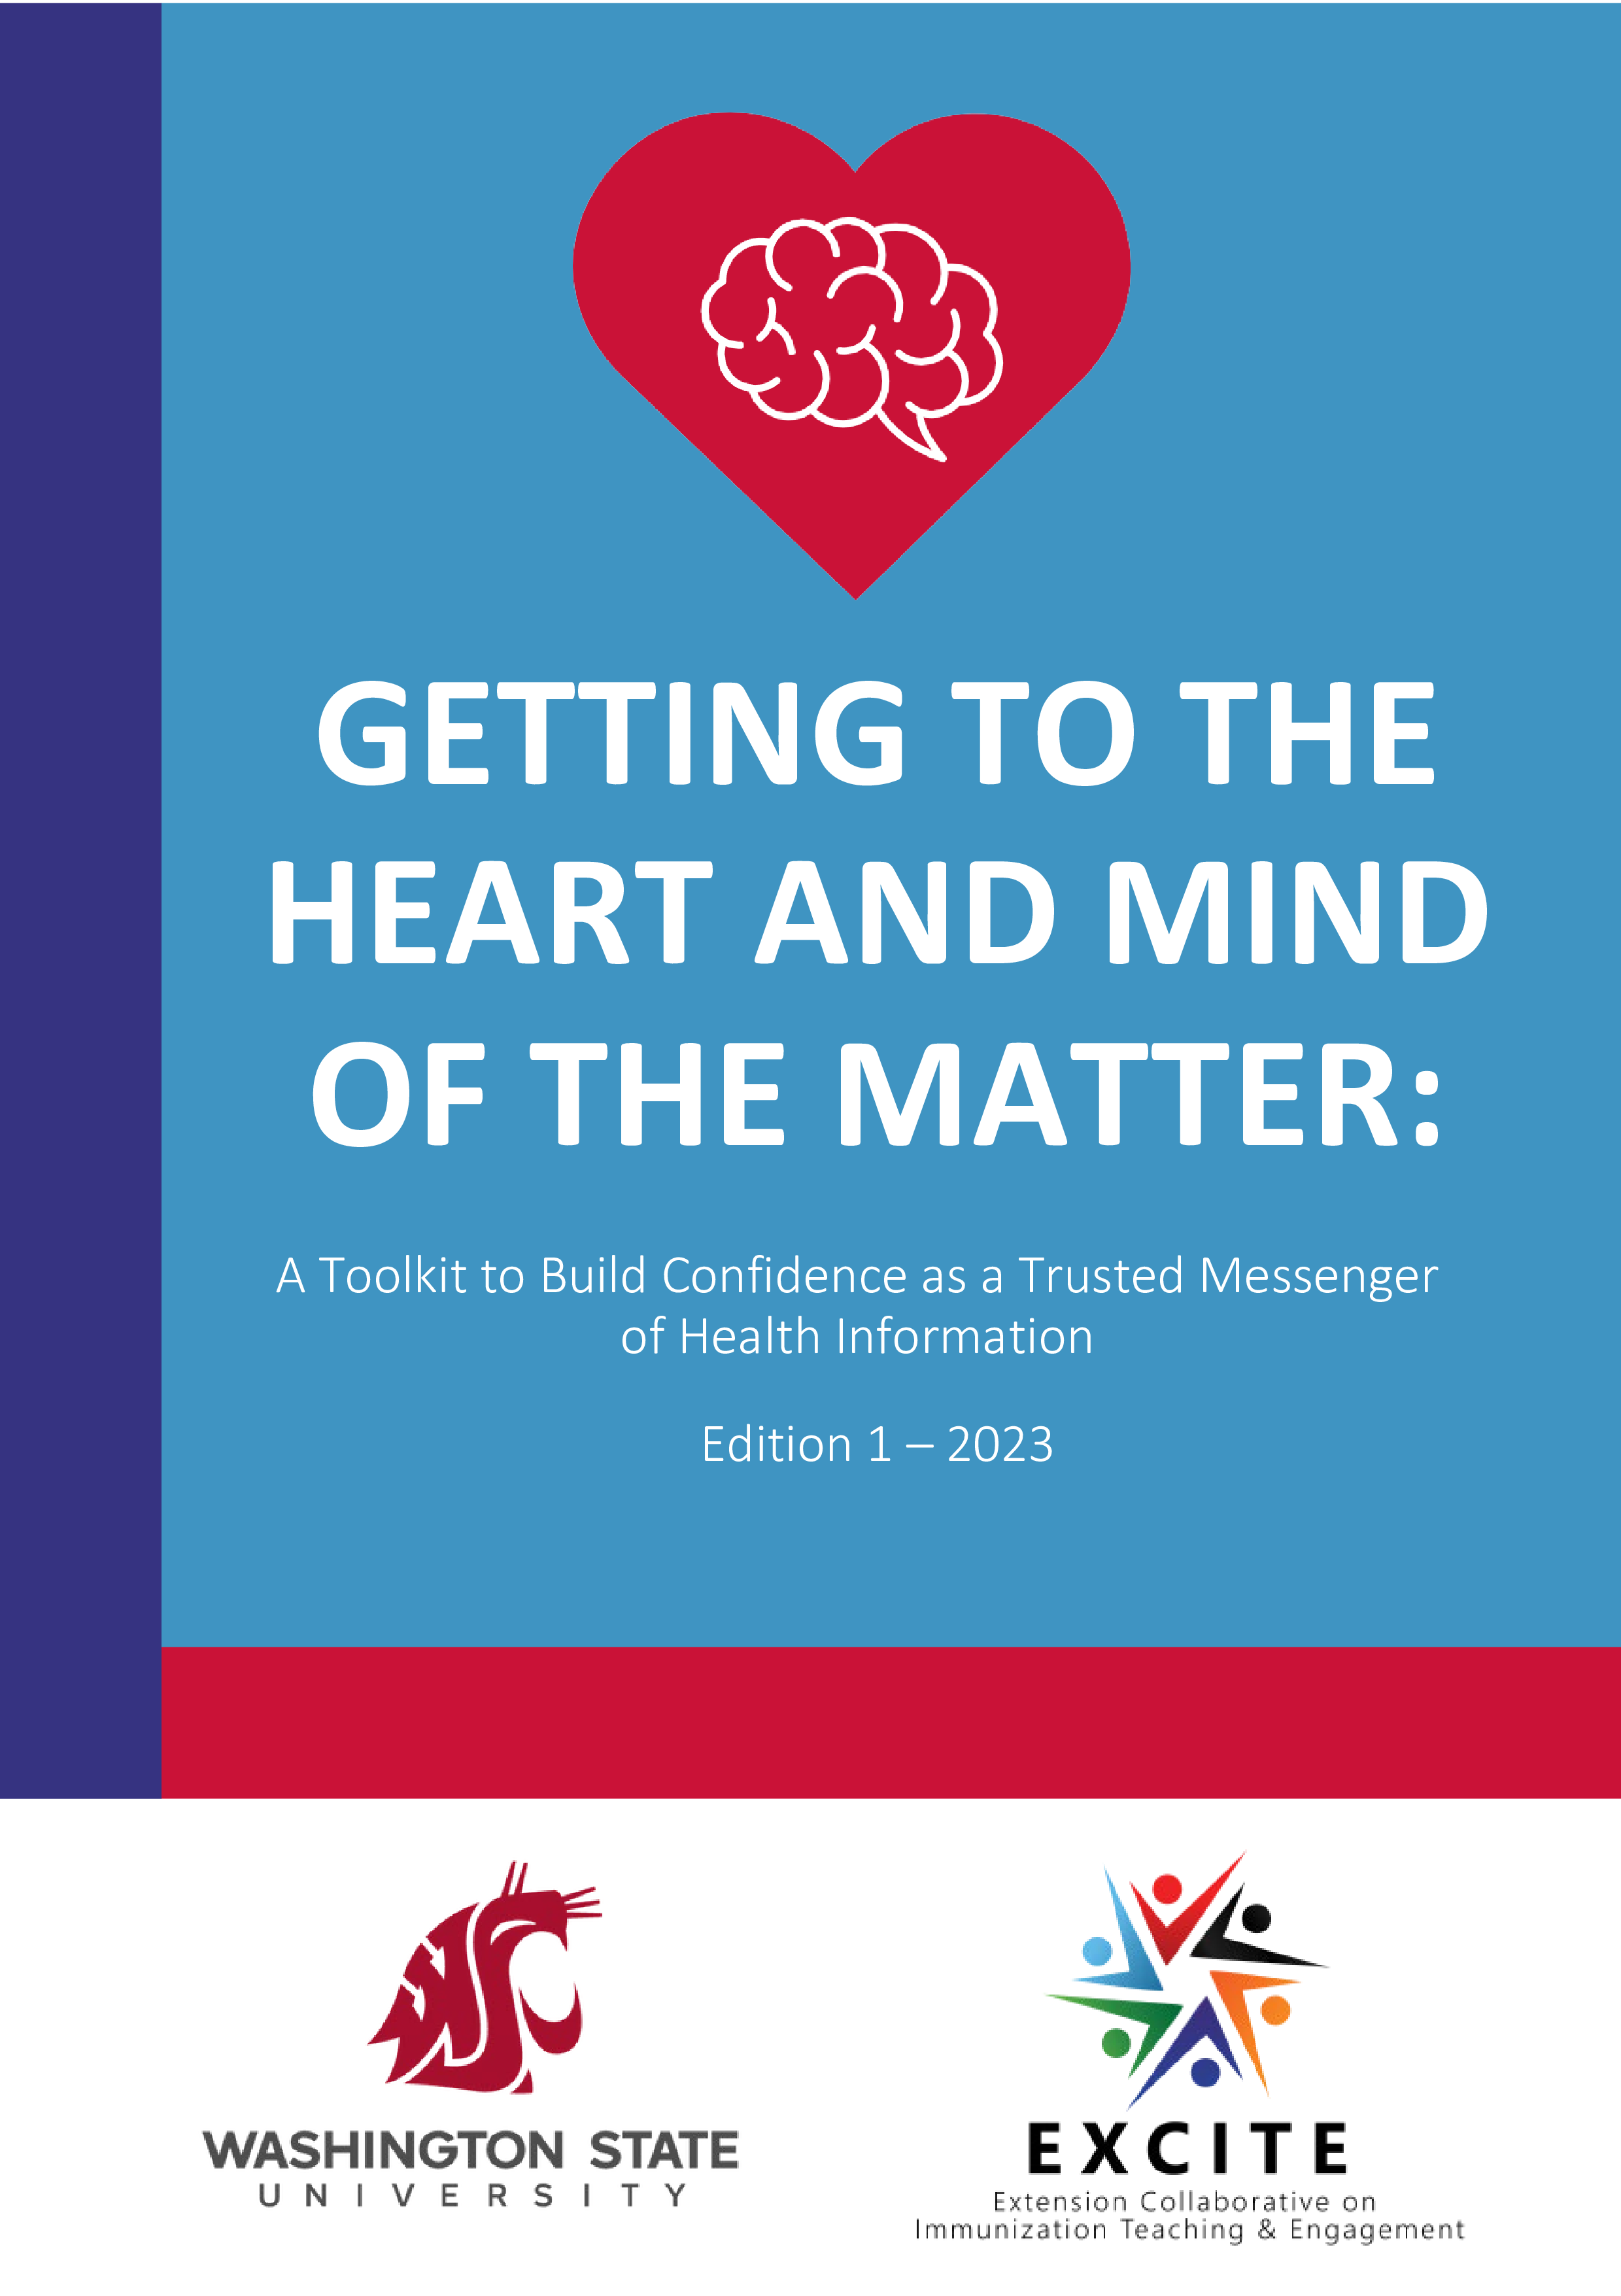 Cover page of PDF toolkit displays title text and the image of a brain overlaid a heart.